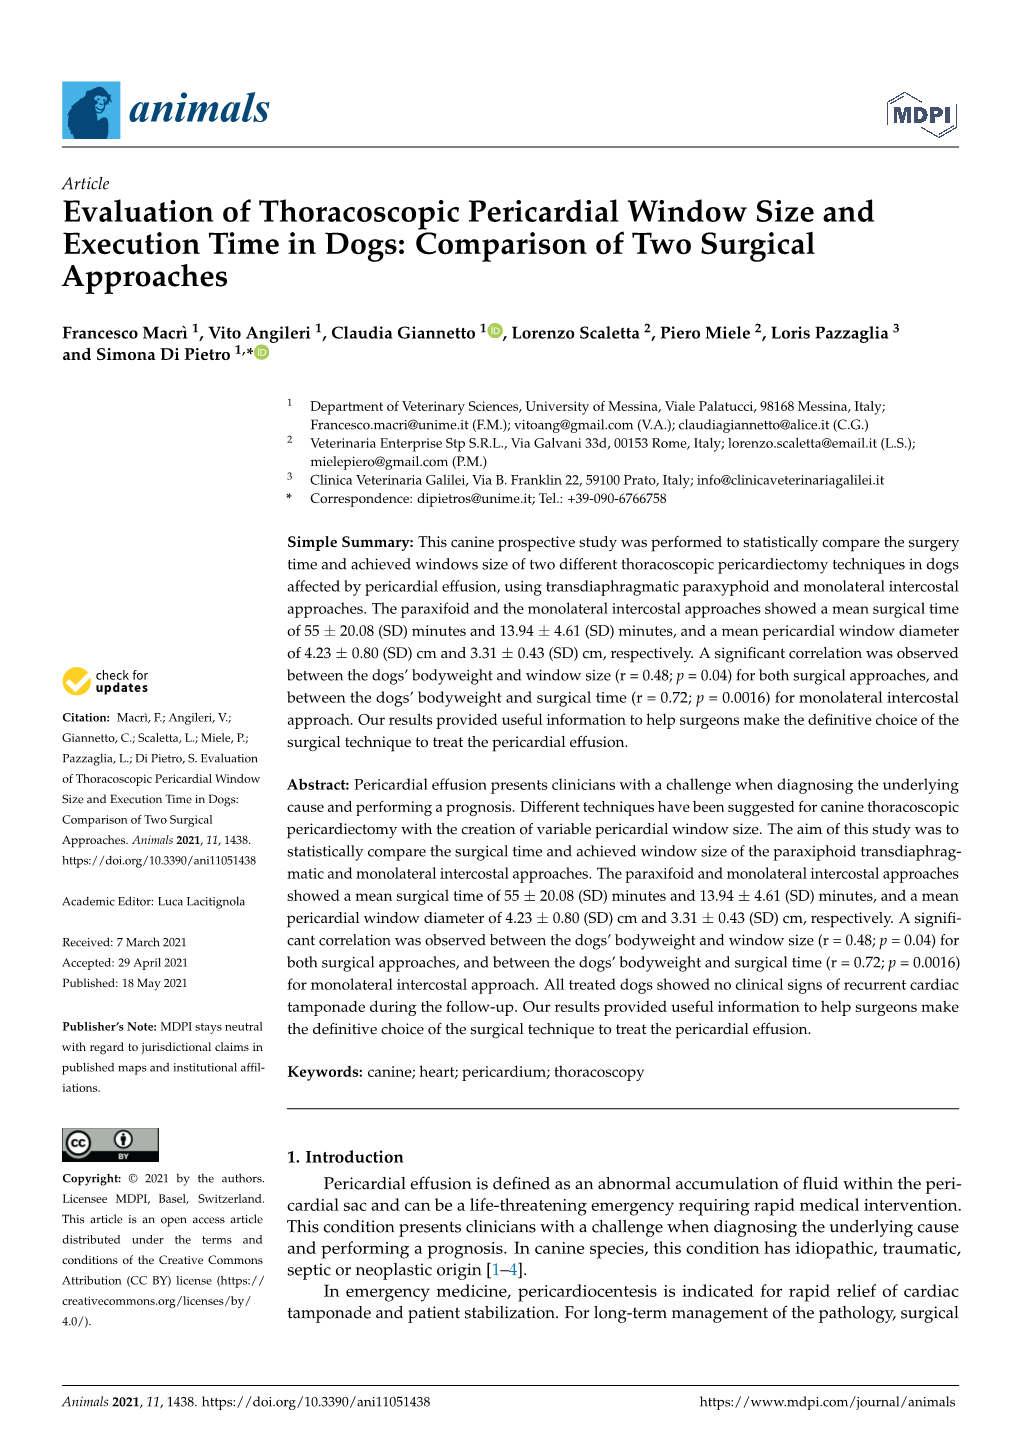 Evaluation of Thoracoscopic Pericardial Window Size and Execution Time in Dogs: Comparison of Two Surgical Approaches